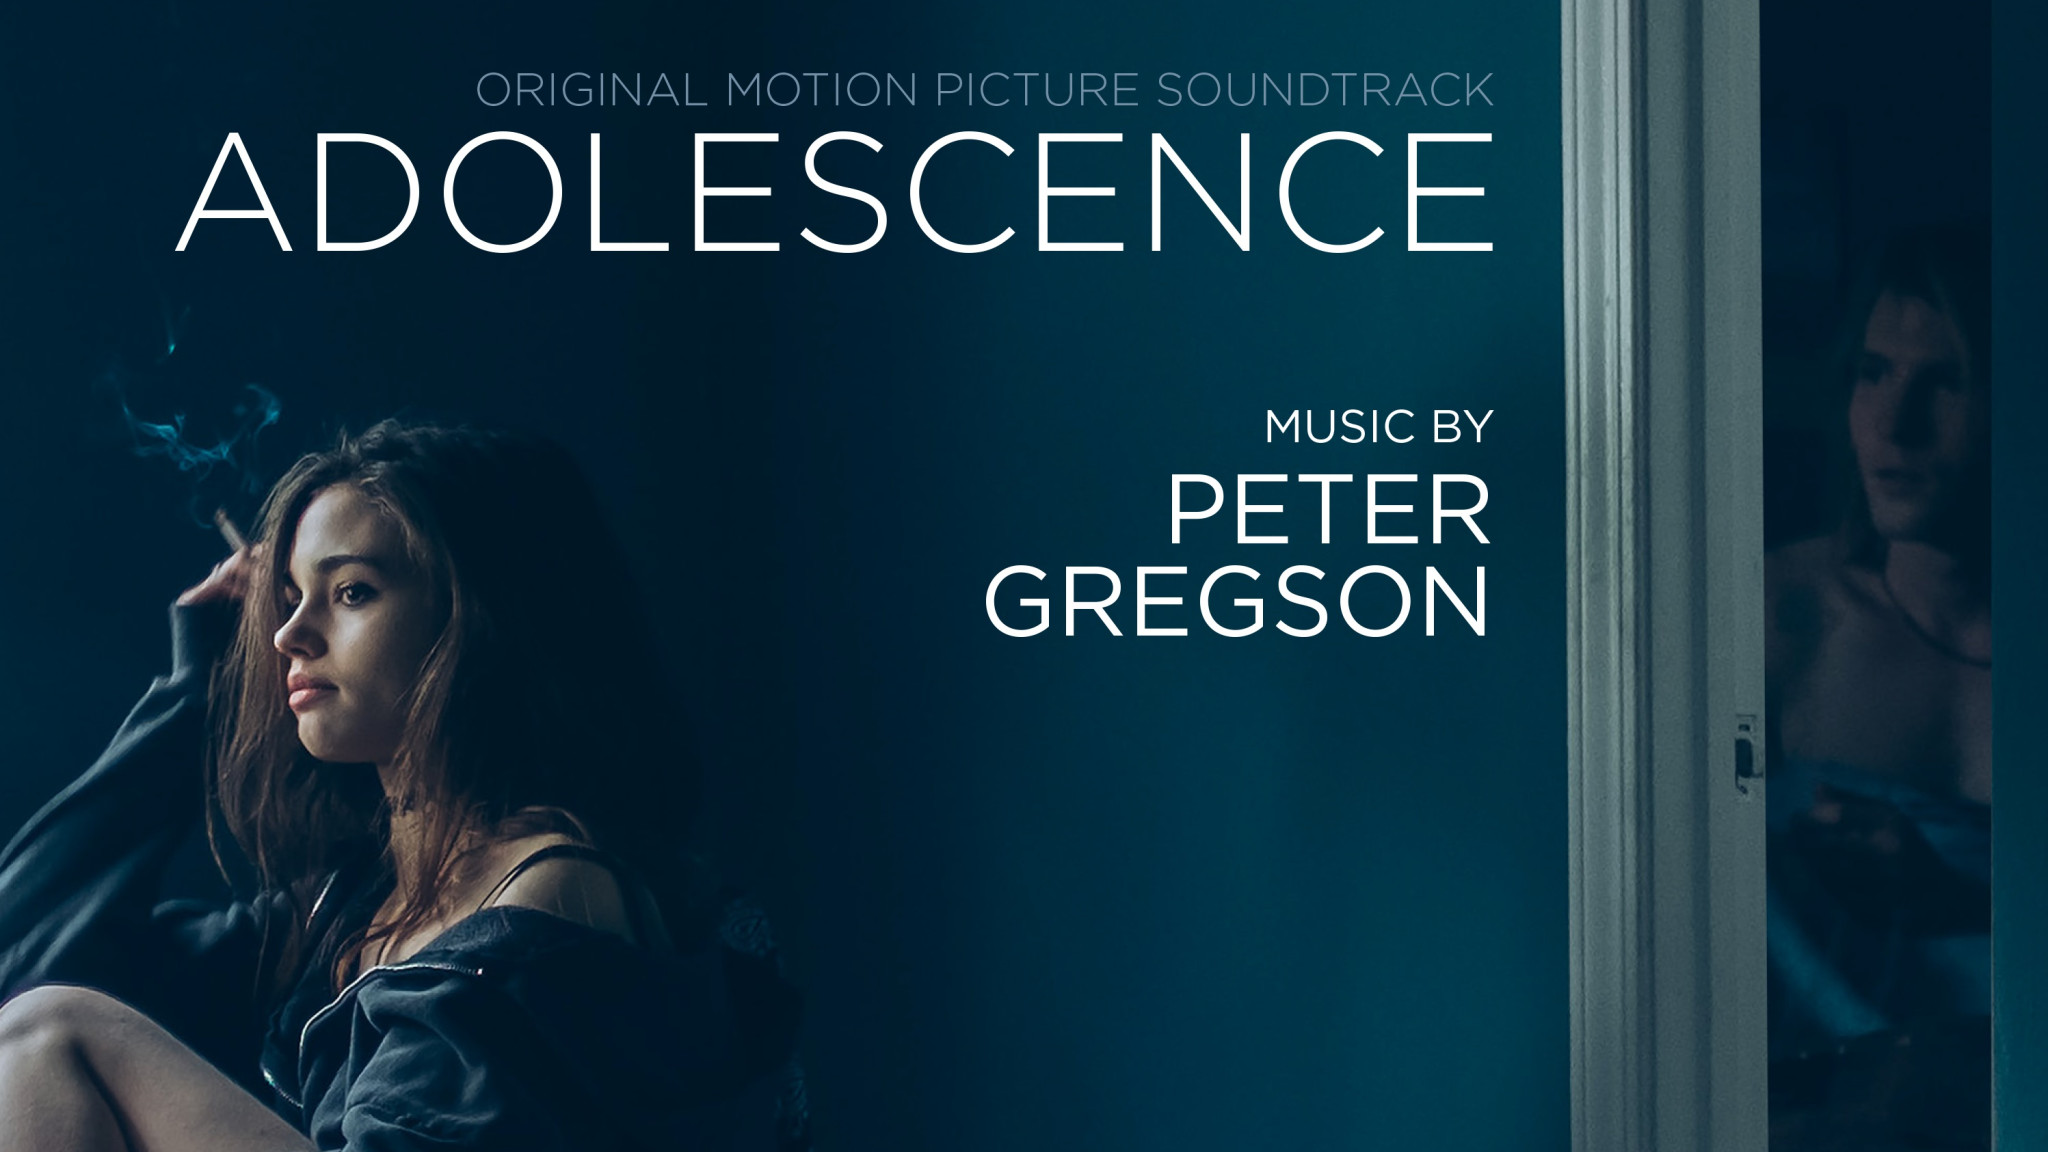 A New Film Score by Peter Gregson